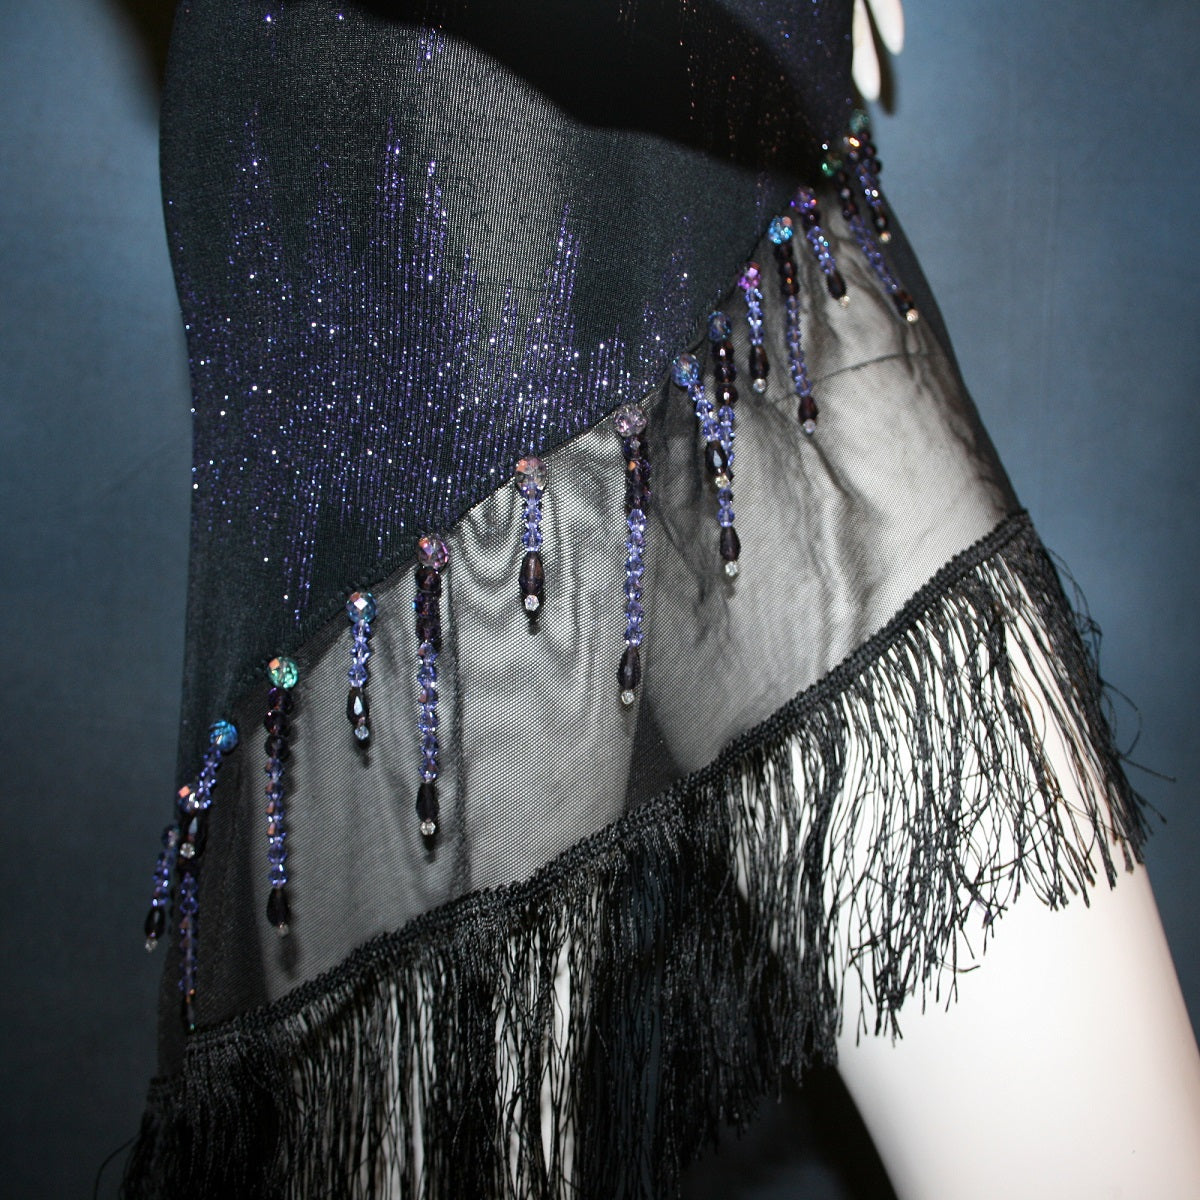 side close details of Latin/rhythm/tango dress created in black glitter slinky with an awesome electrifying tanzinite/perwinkle glitter pattern! It features one long sleeve, lattice work detailing up the left side, a short skirt line in front that angles down to a long peak in the back, with a sheer mesh inset, fringe & Swarovski hand beading in tanzanite & black.